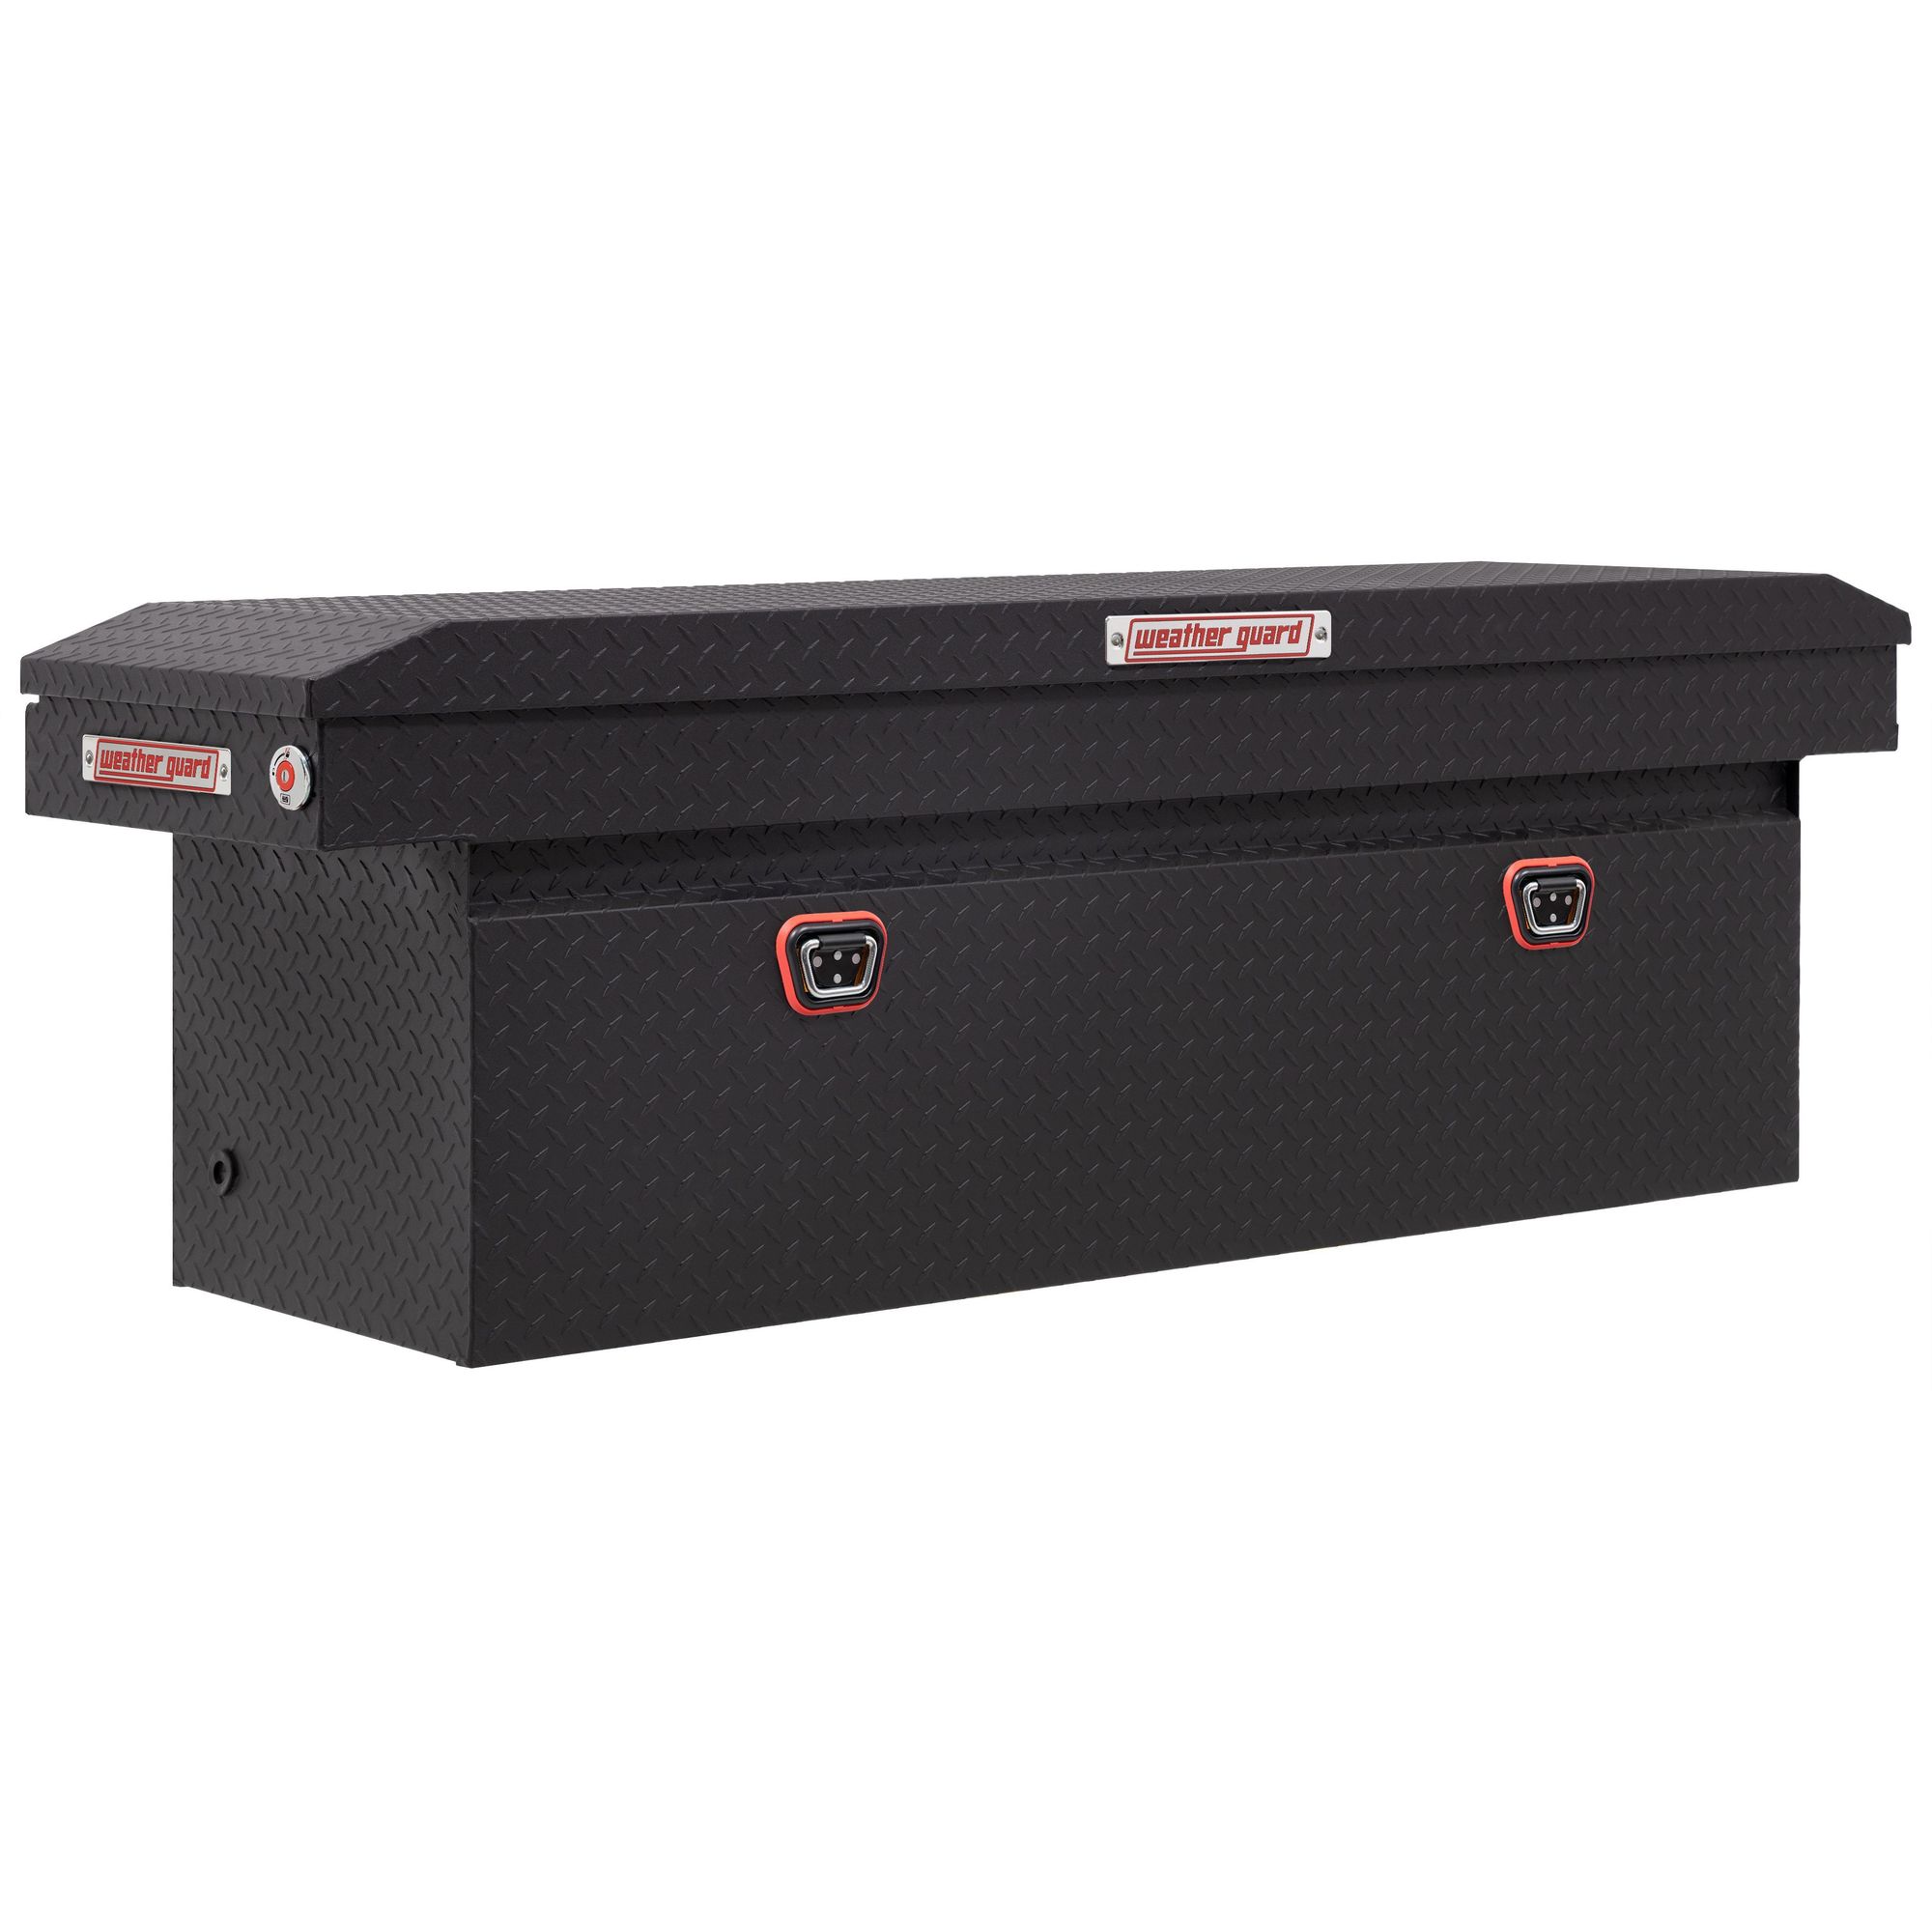 Weather Guard, 71Inch L Saddle Box, Full Deep, Width 72 in, Material Aluminum, Color Finish Textured Matte Black, Model 123-52-04